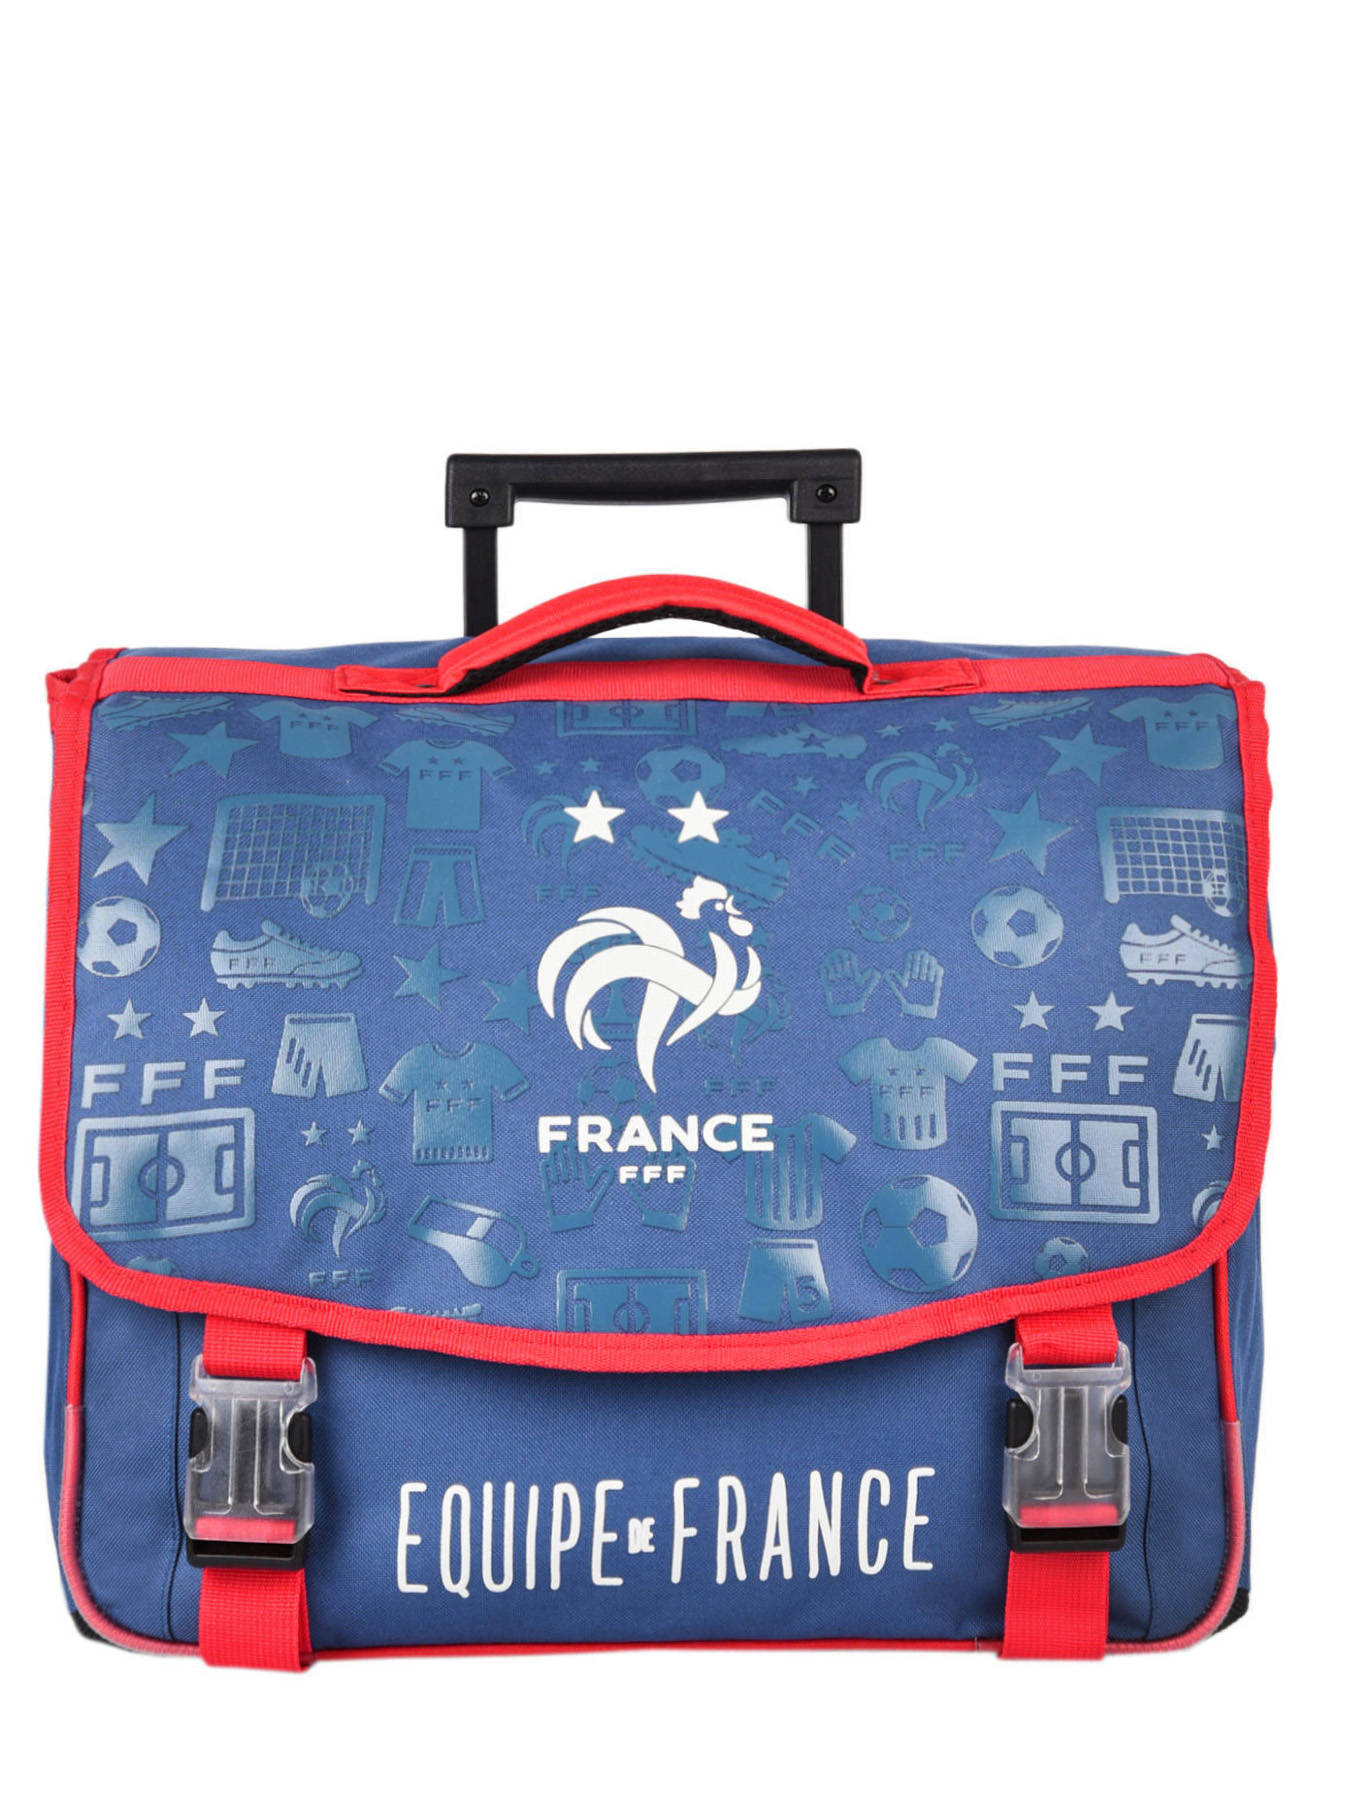 Cartable A Roulettes 2 Compartiments Football